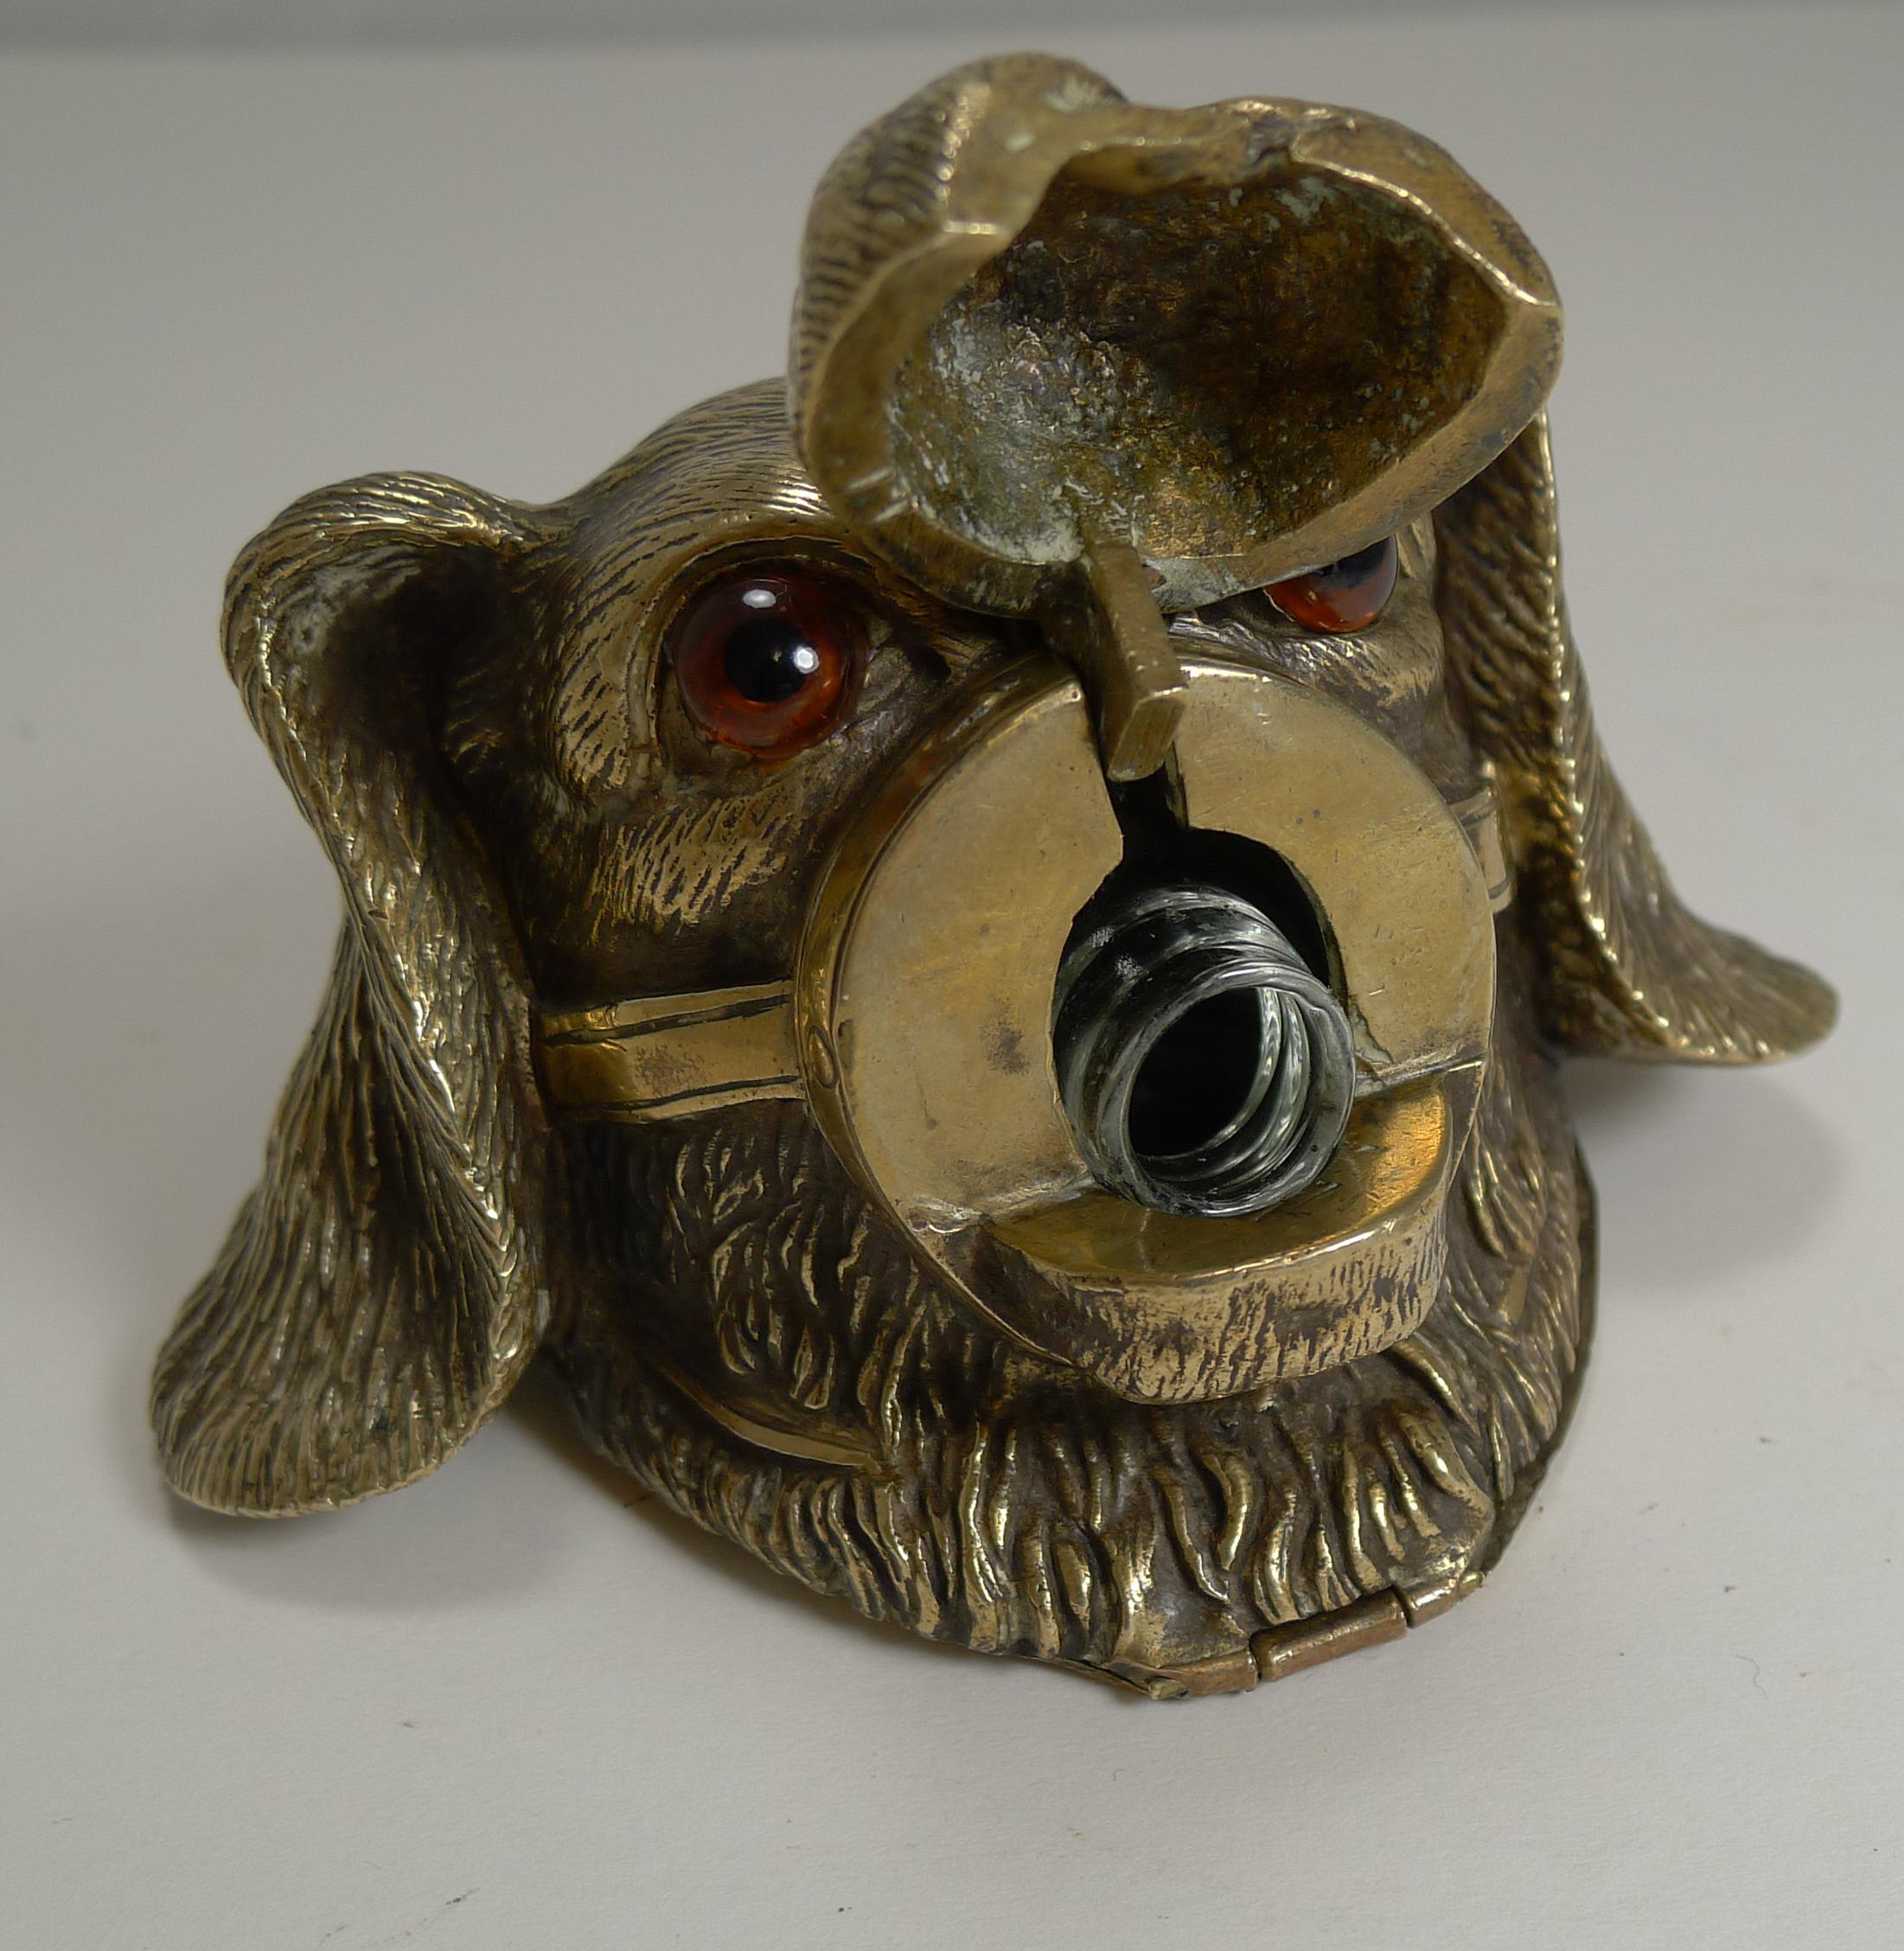 Antique English Novelty / Figural Brass Inkwell, Glass Eyes, circa 1880 (Messing)